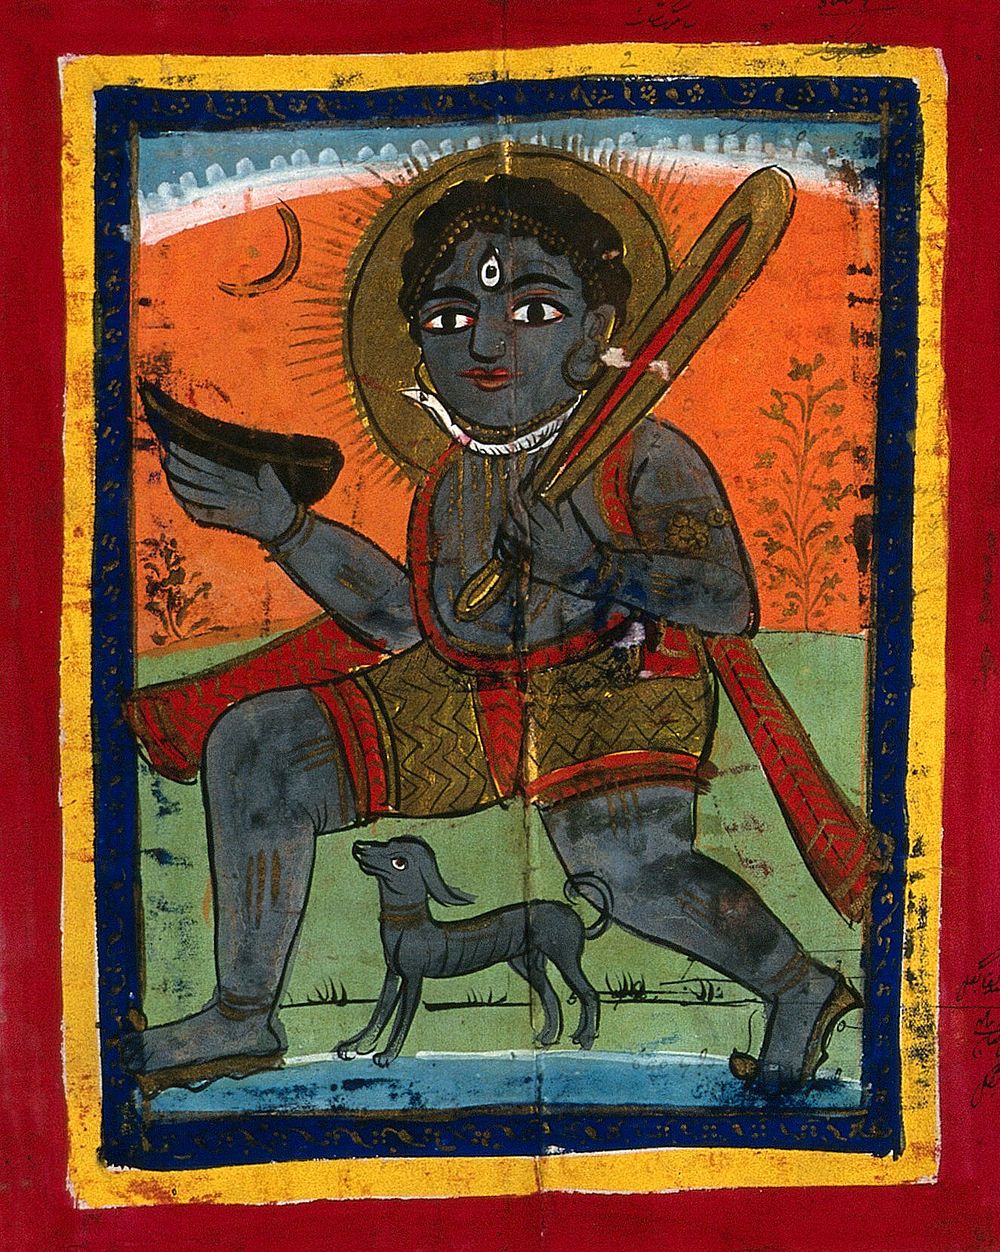 Page 132: Bhairava with his attributes (a dog, a club and a bowl). Gouache painting.